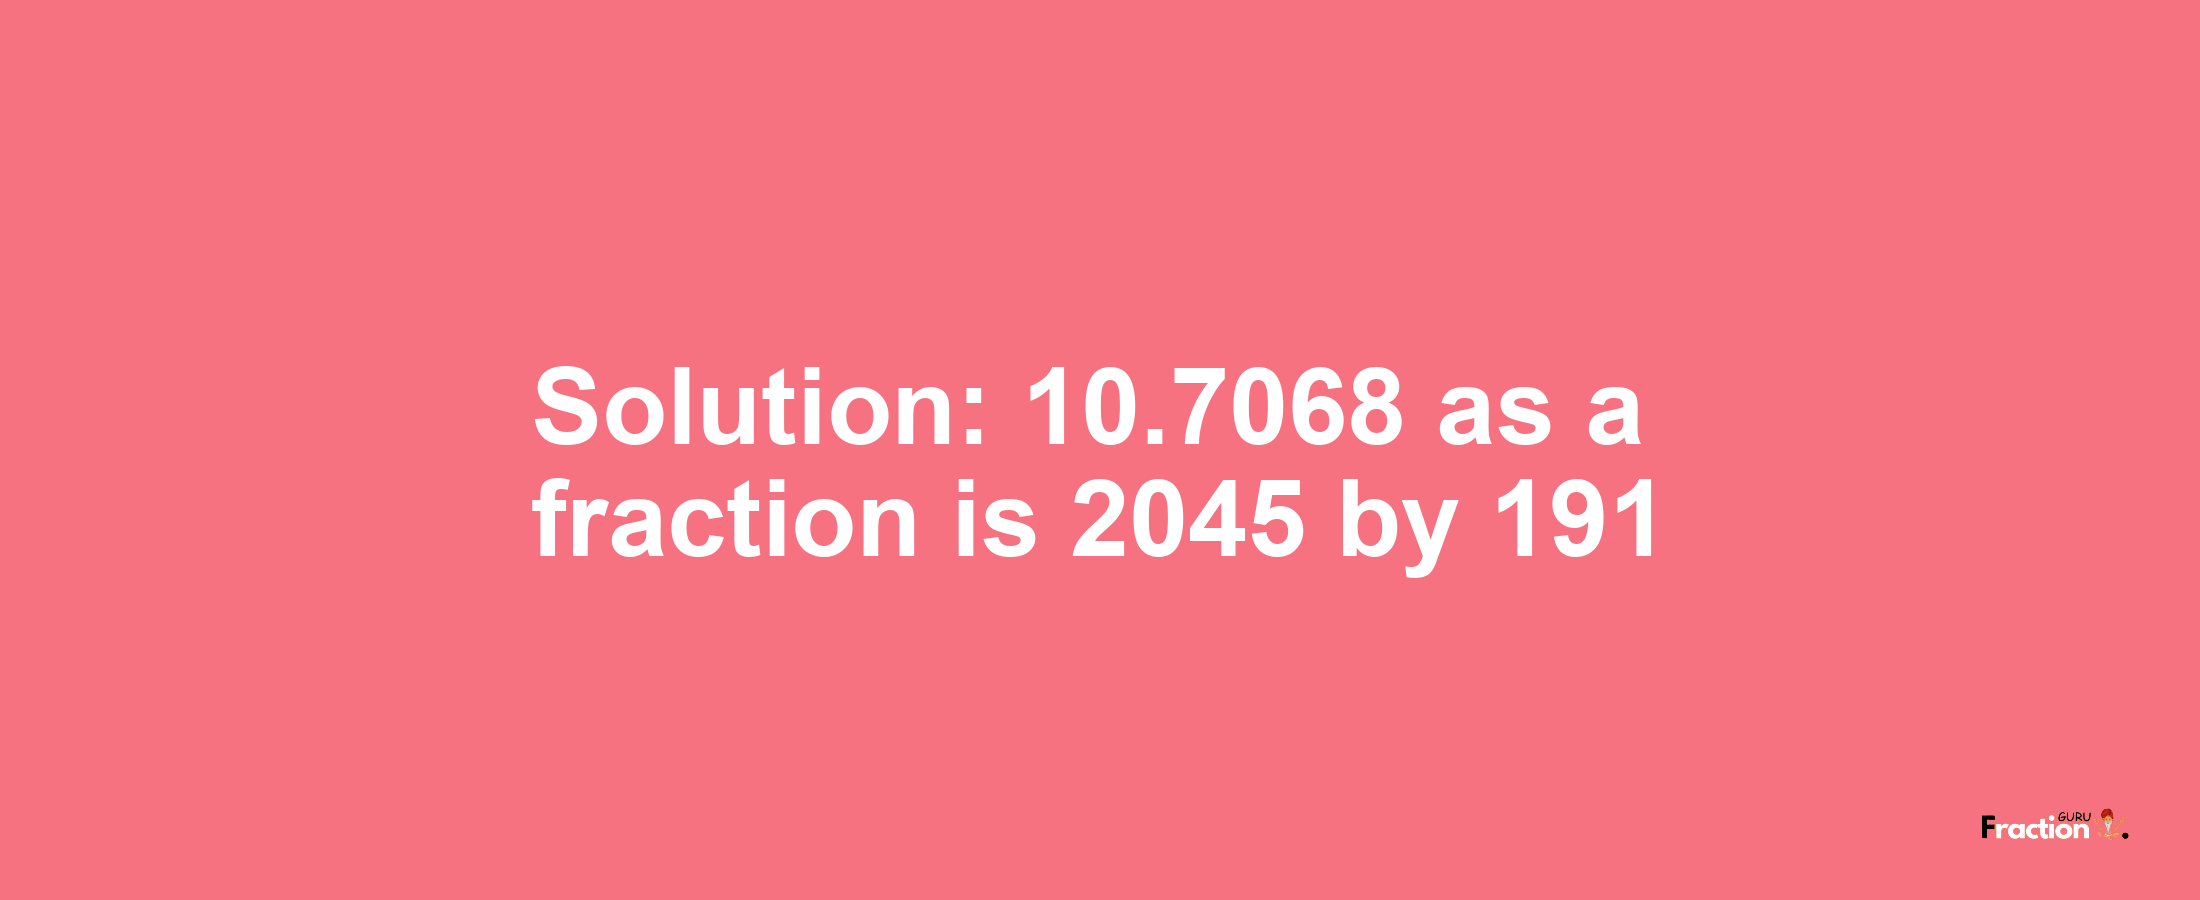 Solution:10.7068 as a fraction is 2045/191